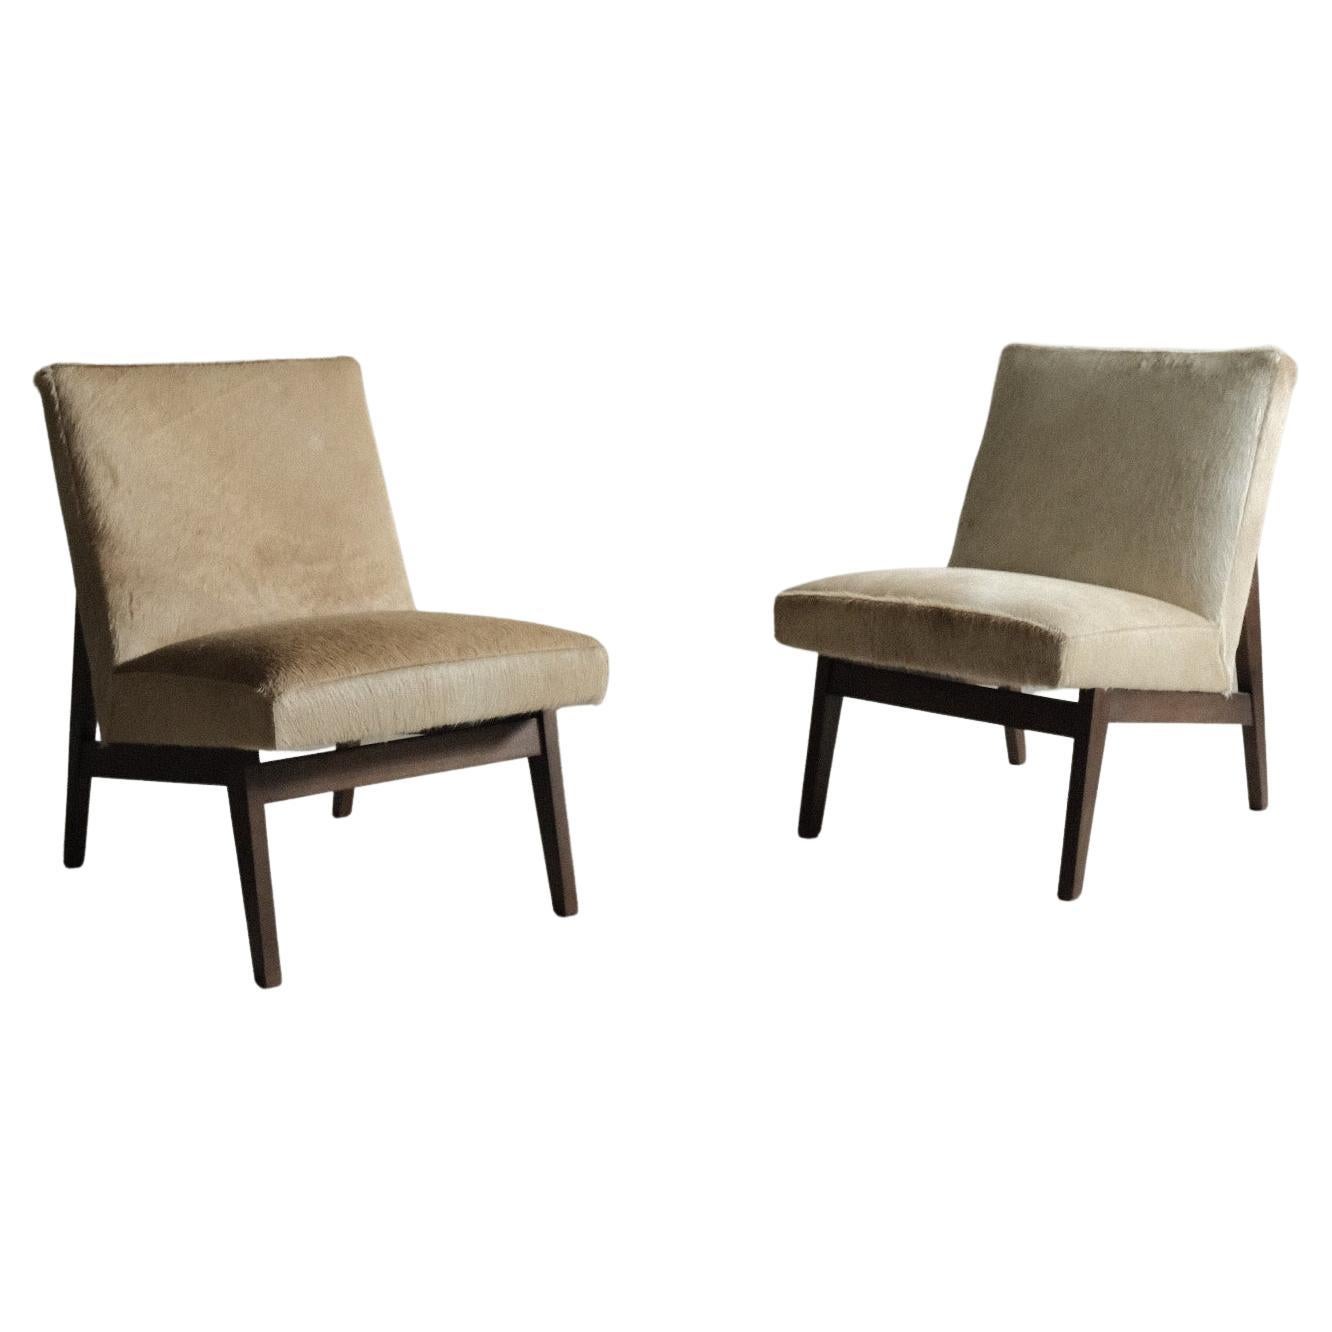 Pair of Scandinavian Mid-Century Chairs, in Style of Pierre Jenneret, 1950s